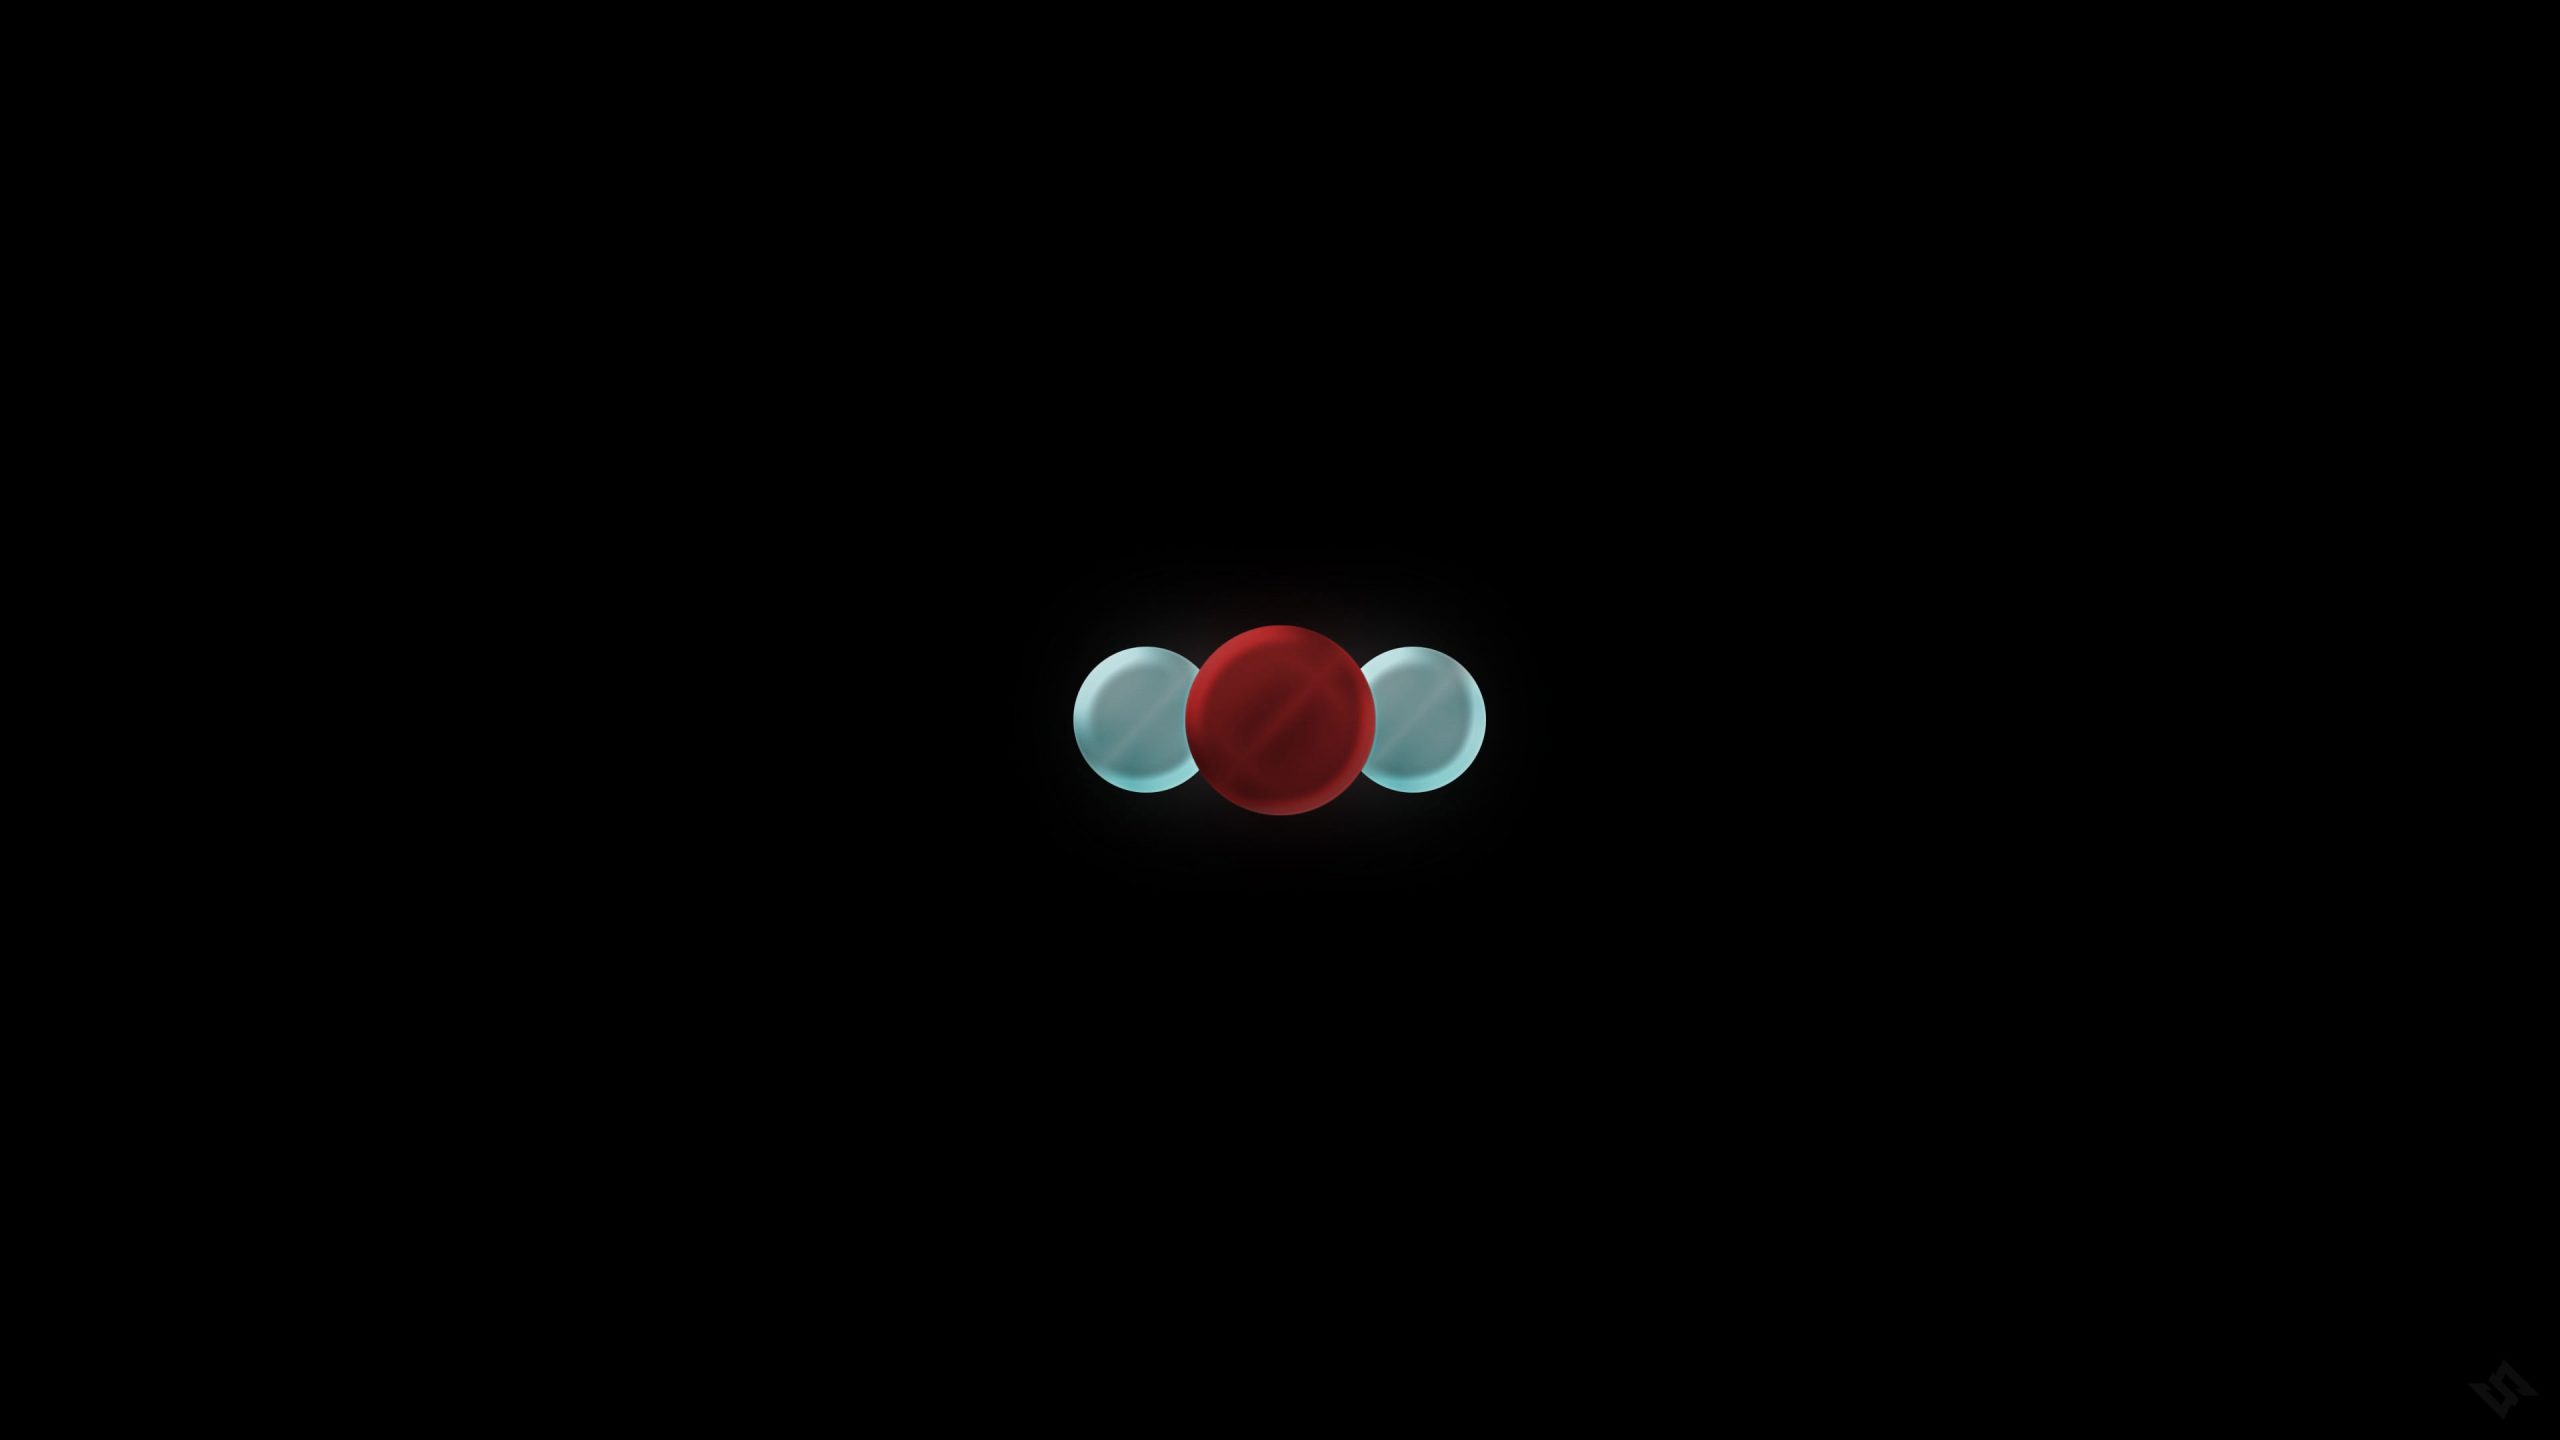 White and red circles wallpaper, black, dark, amoled, vintage, turquoise